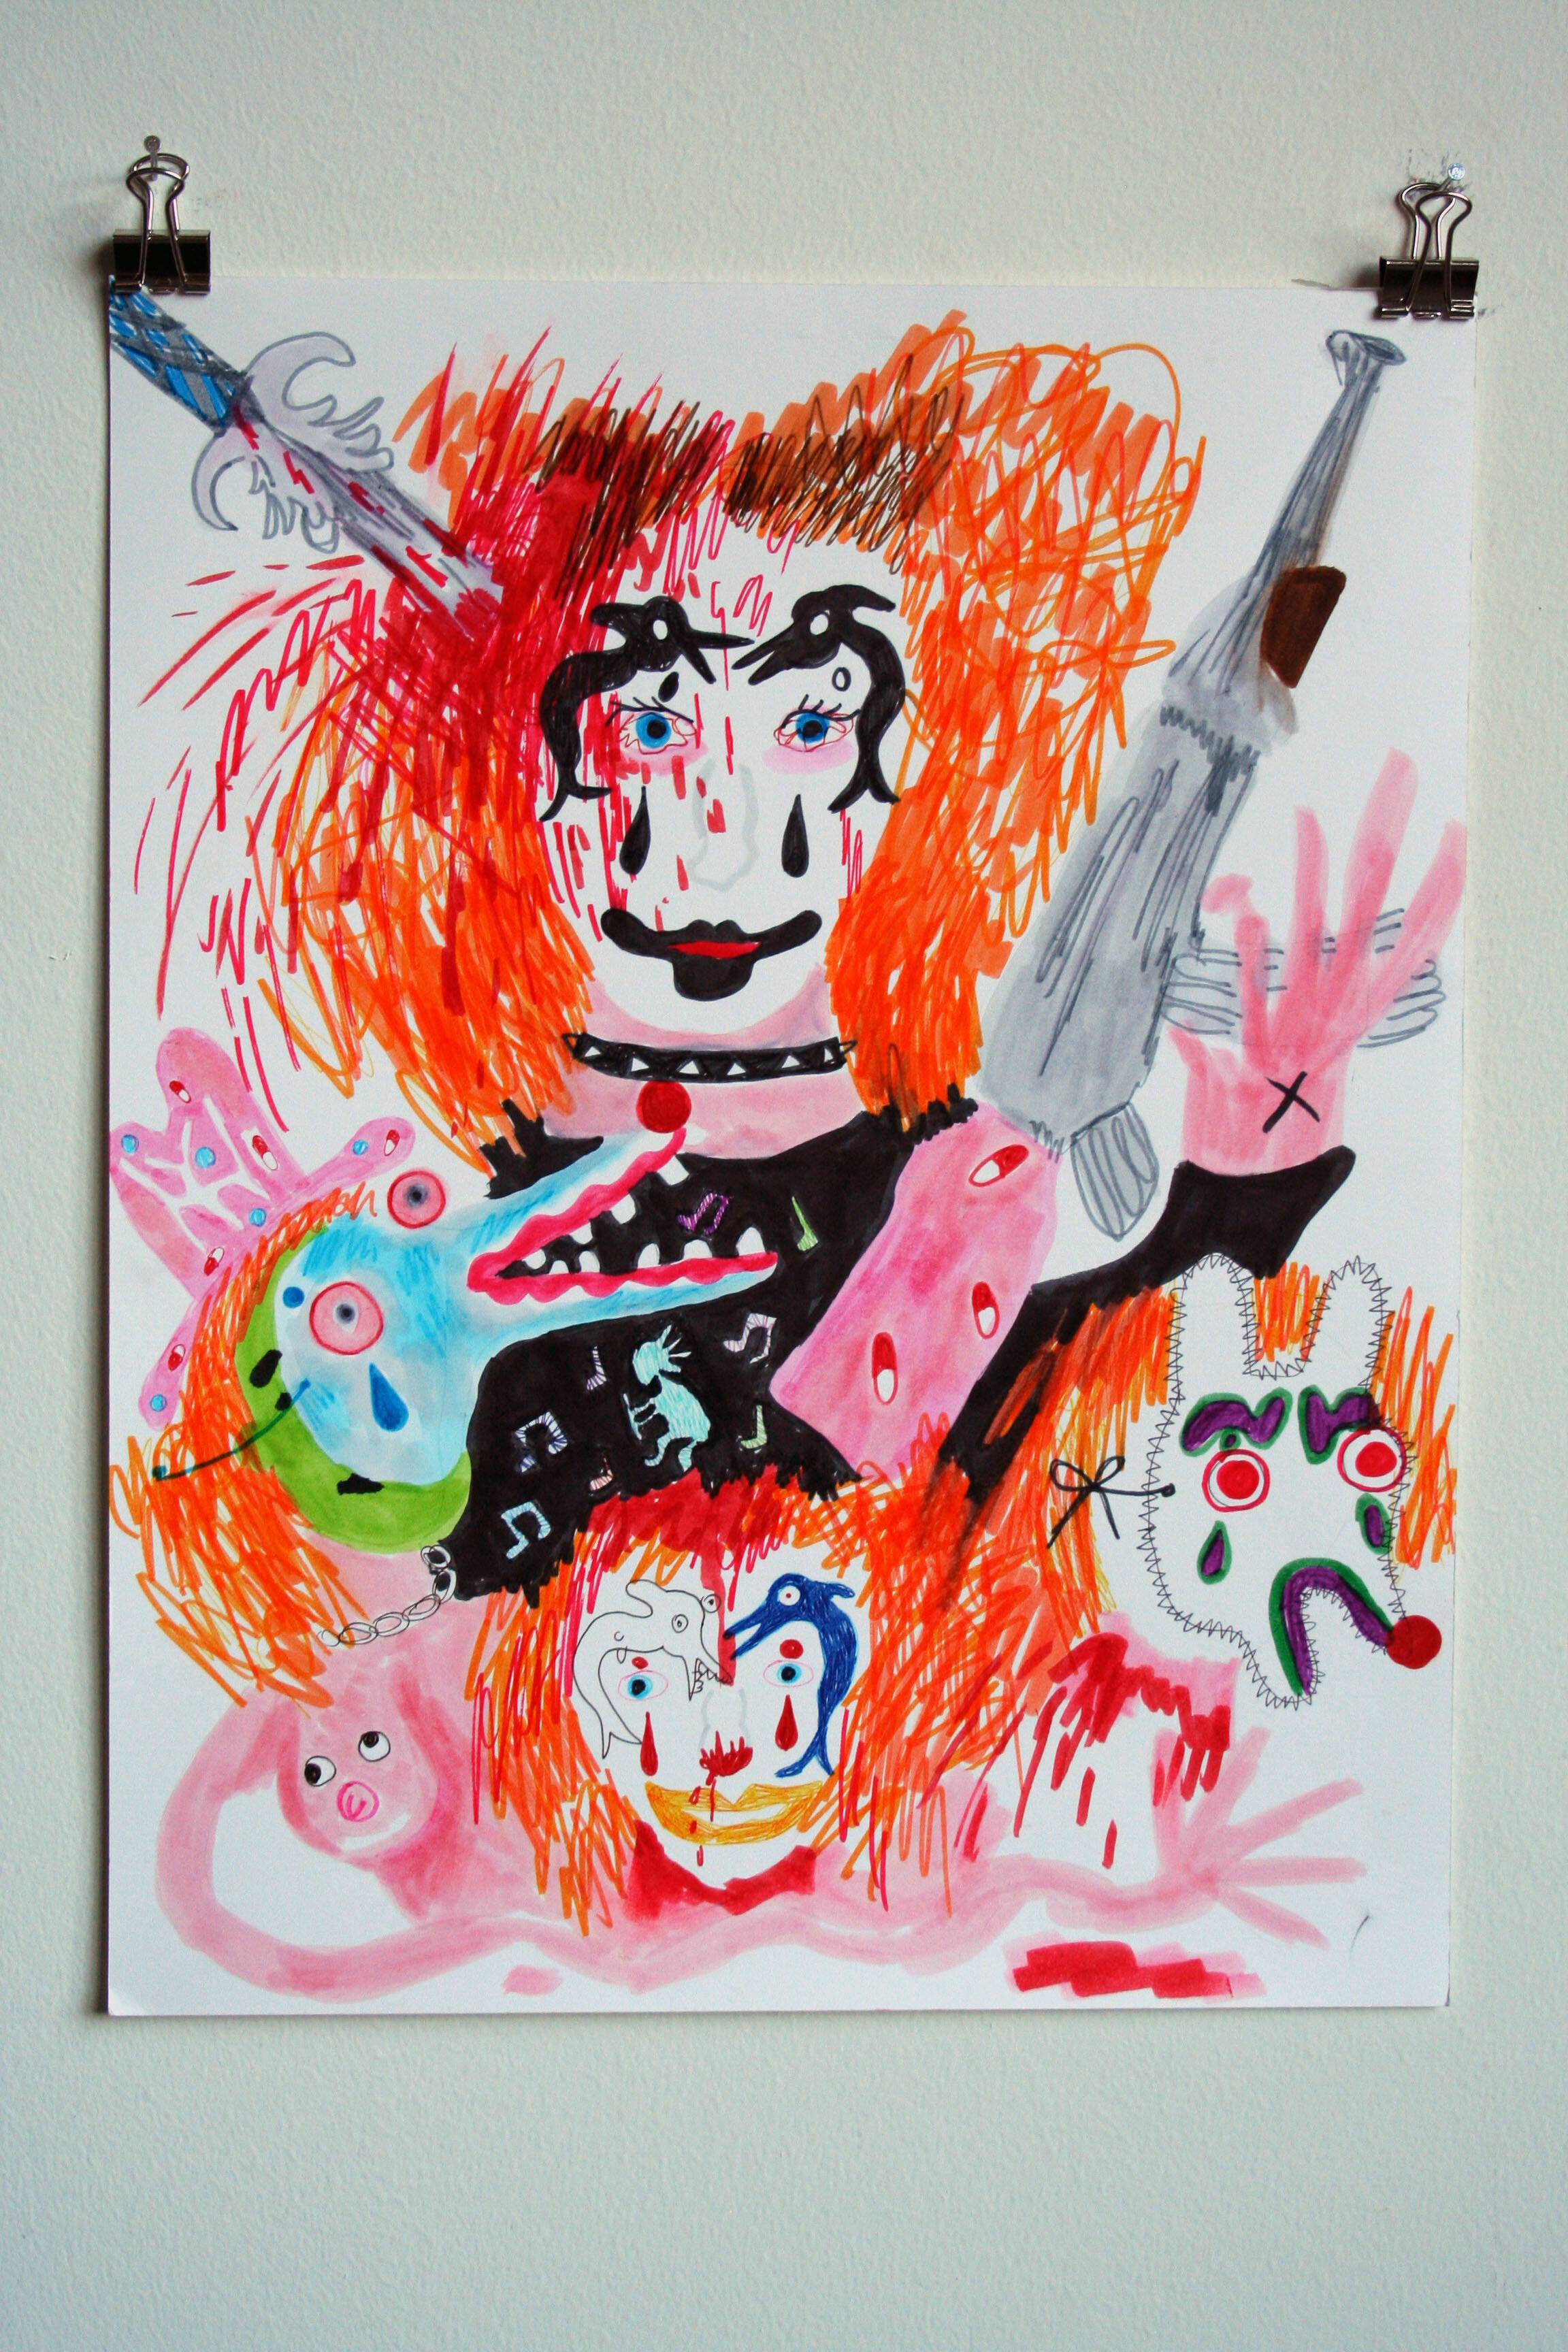   Drop the Mop and Pick Up a Gun,  2015  14 x 11 inches (35.56 x 27.94 cm.)  Marker on paper 